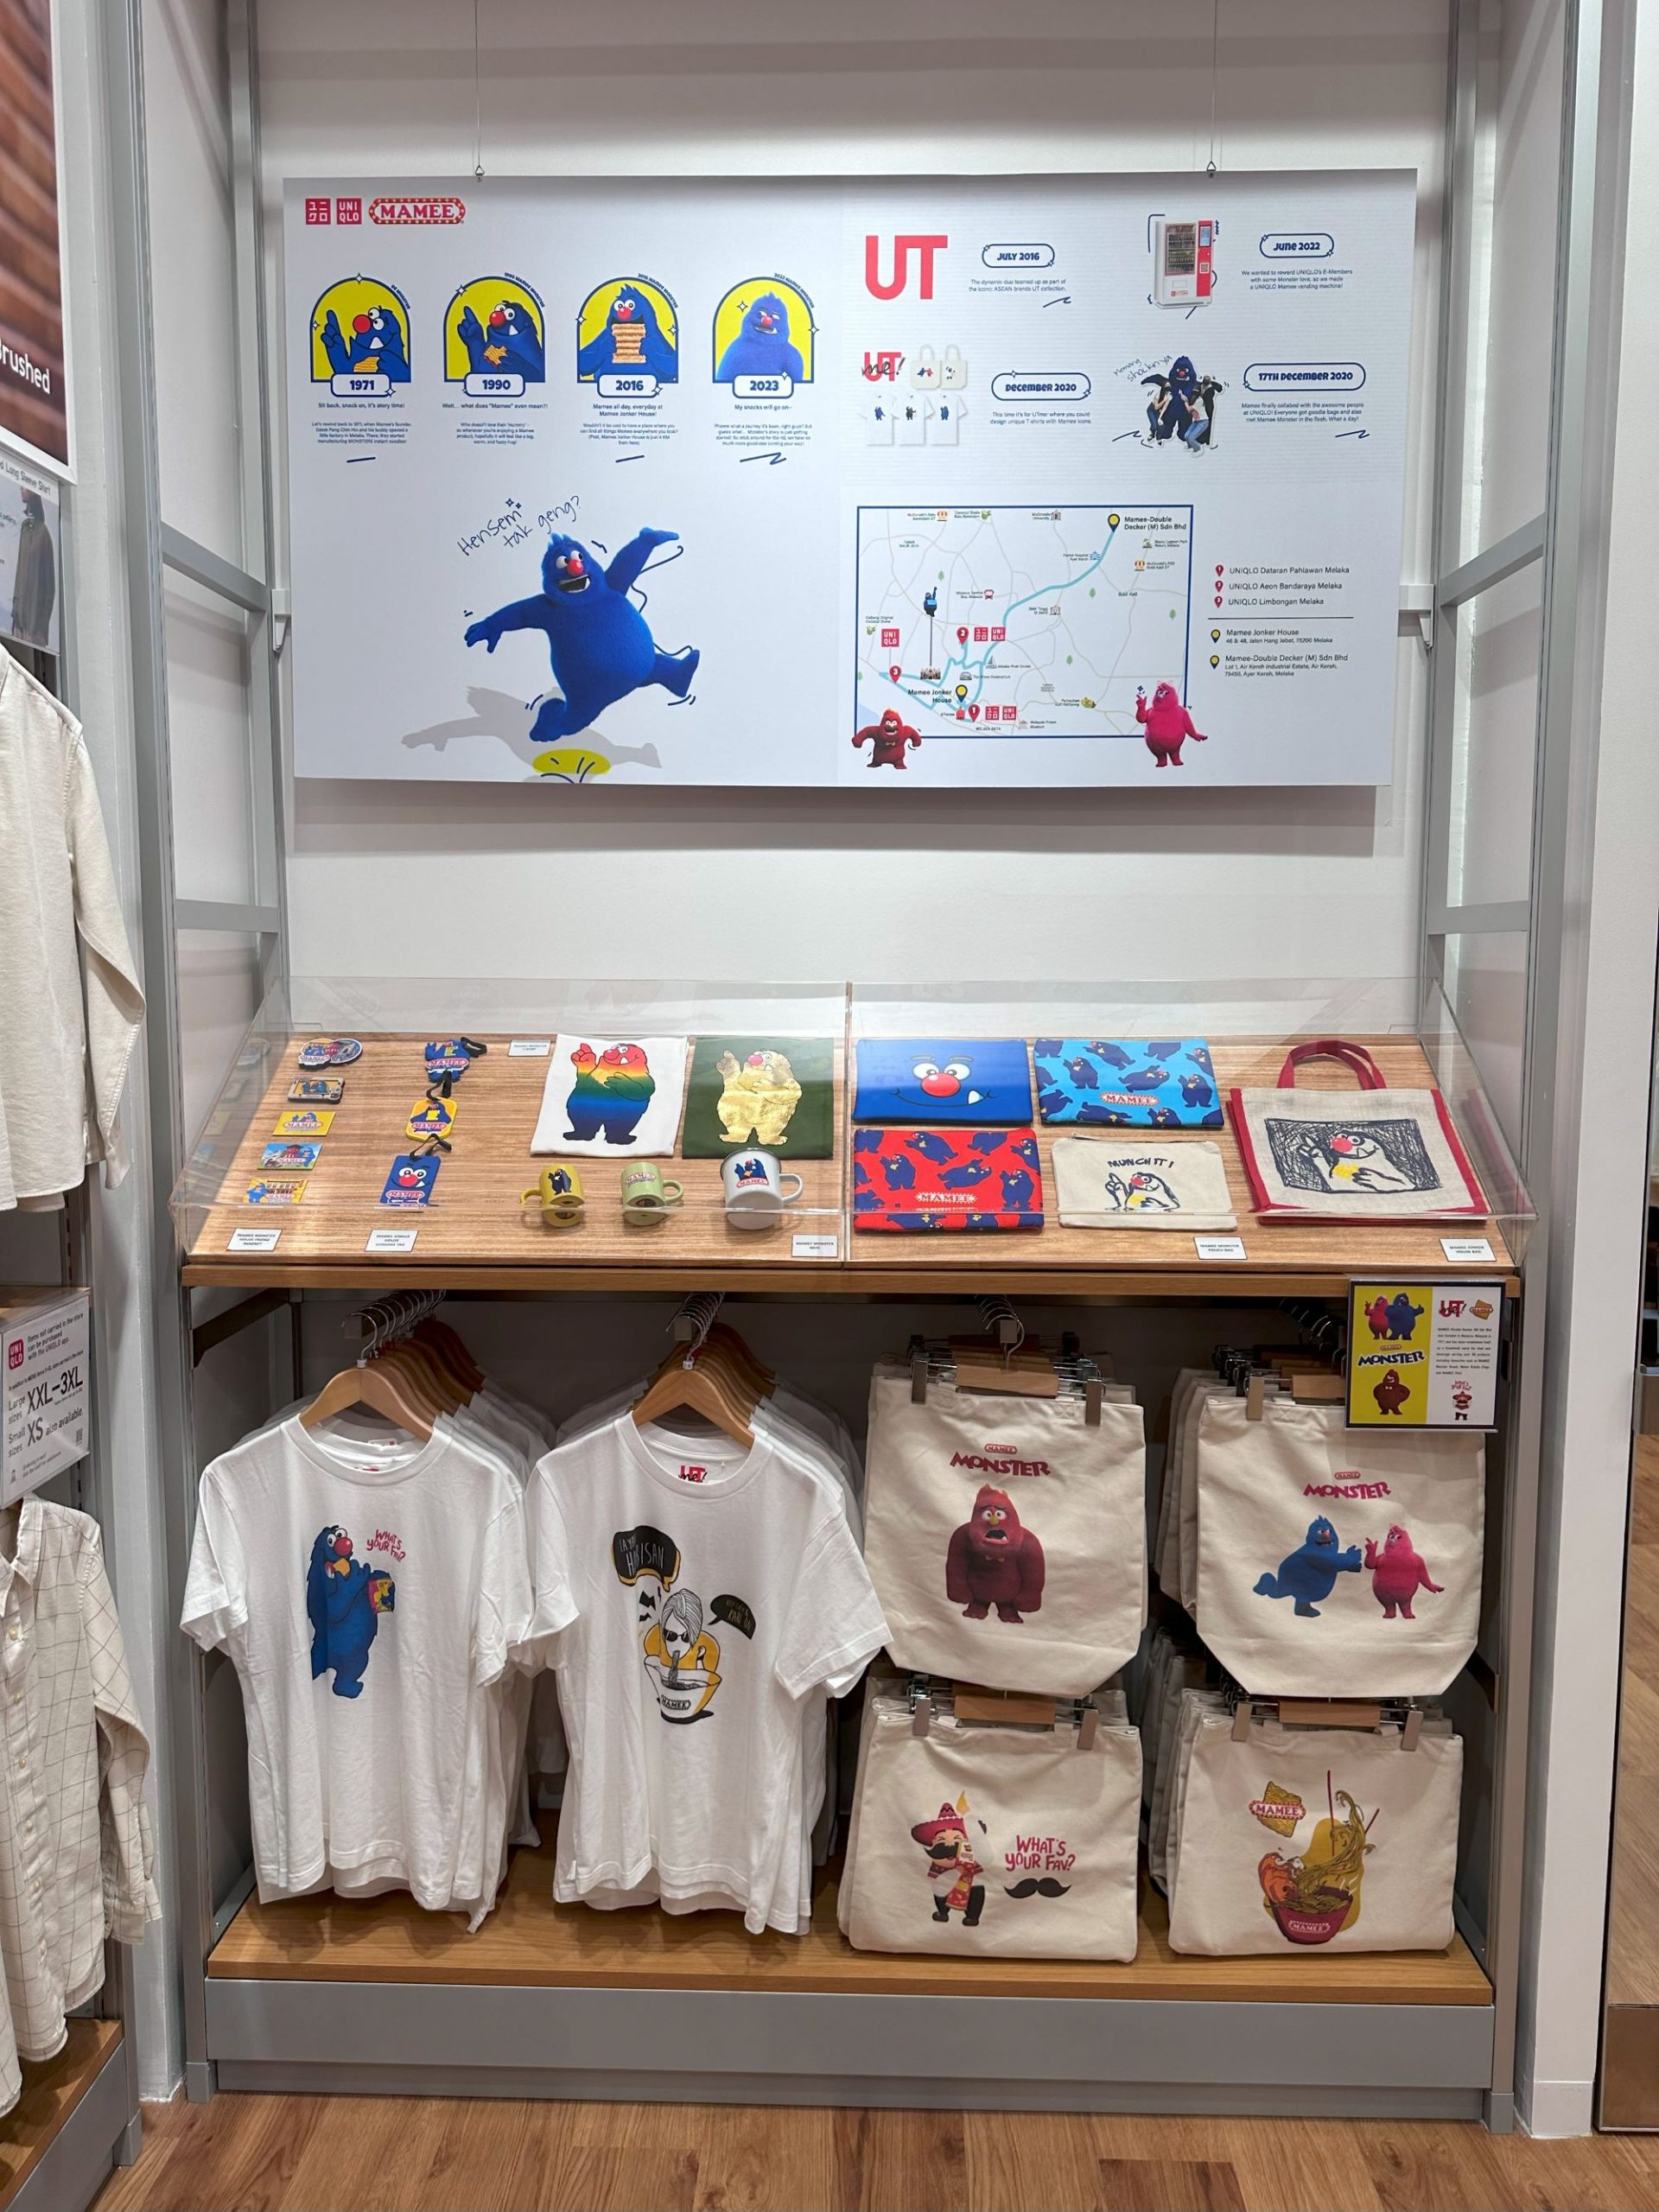 Mamee X UNIQLO 4th Collaboration Is A Joy To Behold With 5 Display Corners Nationwide!